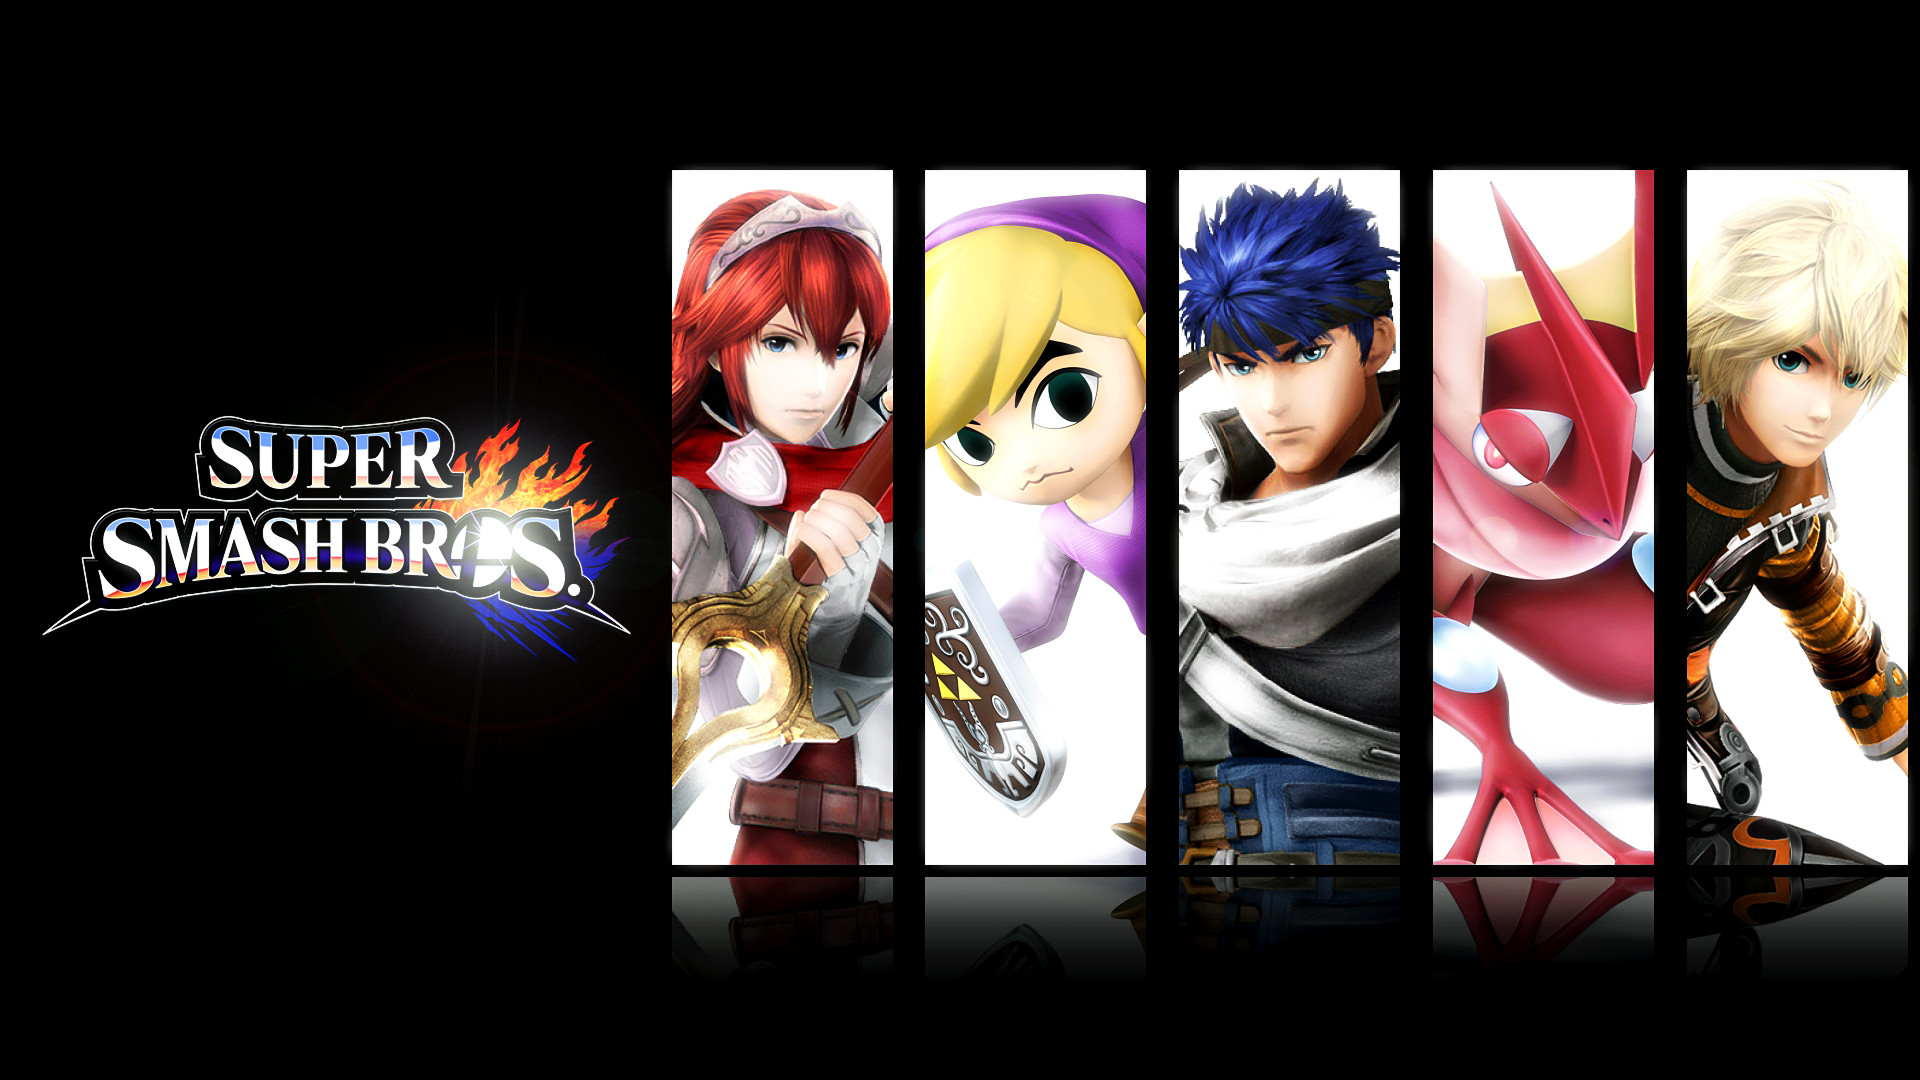 1920x1080 ... Super Smash Bros. 4 3DS and Wii U Mains Wallpaper by Glench